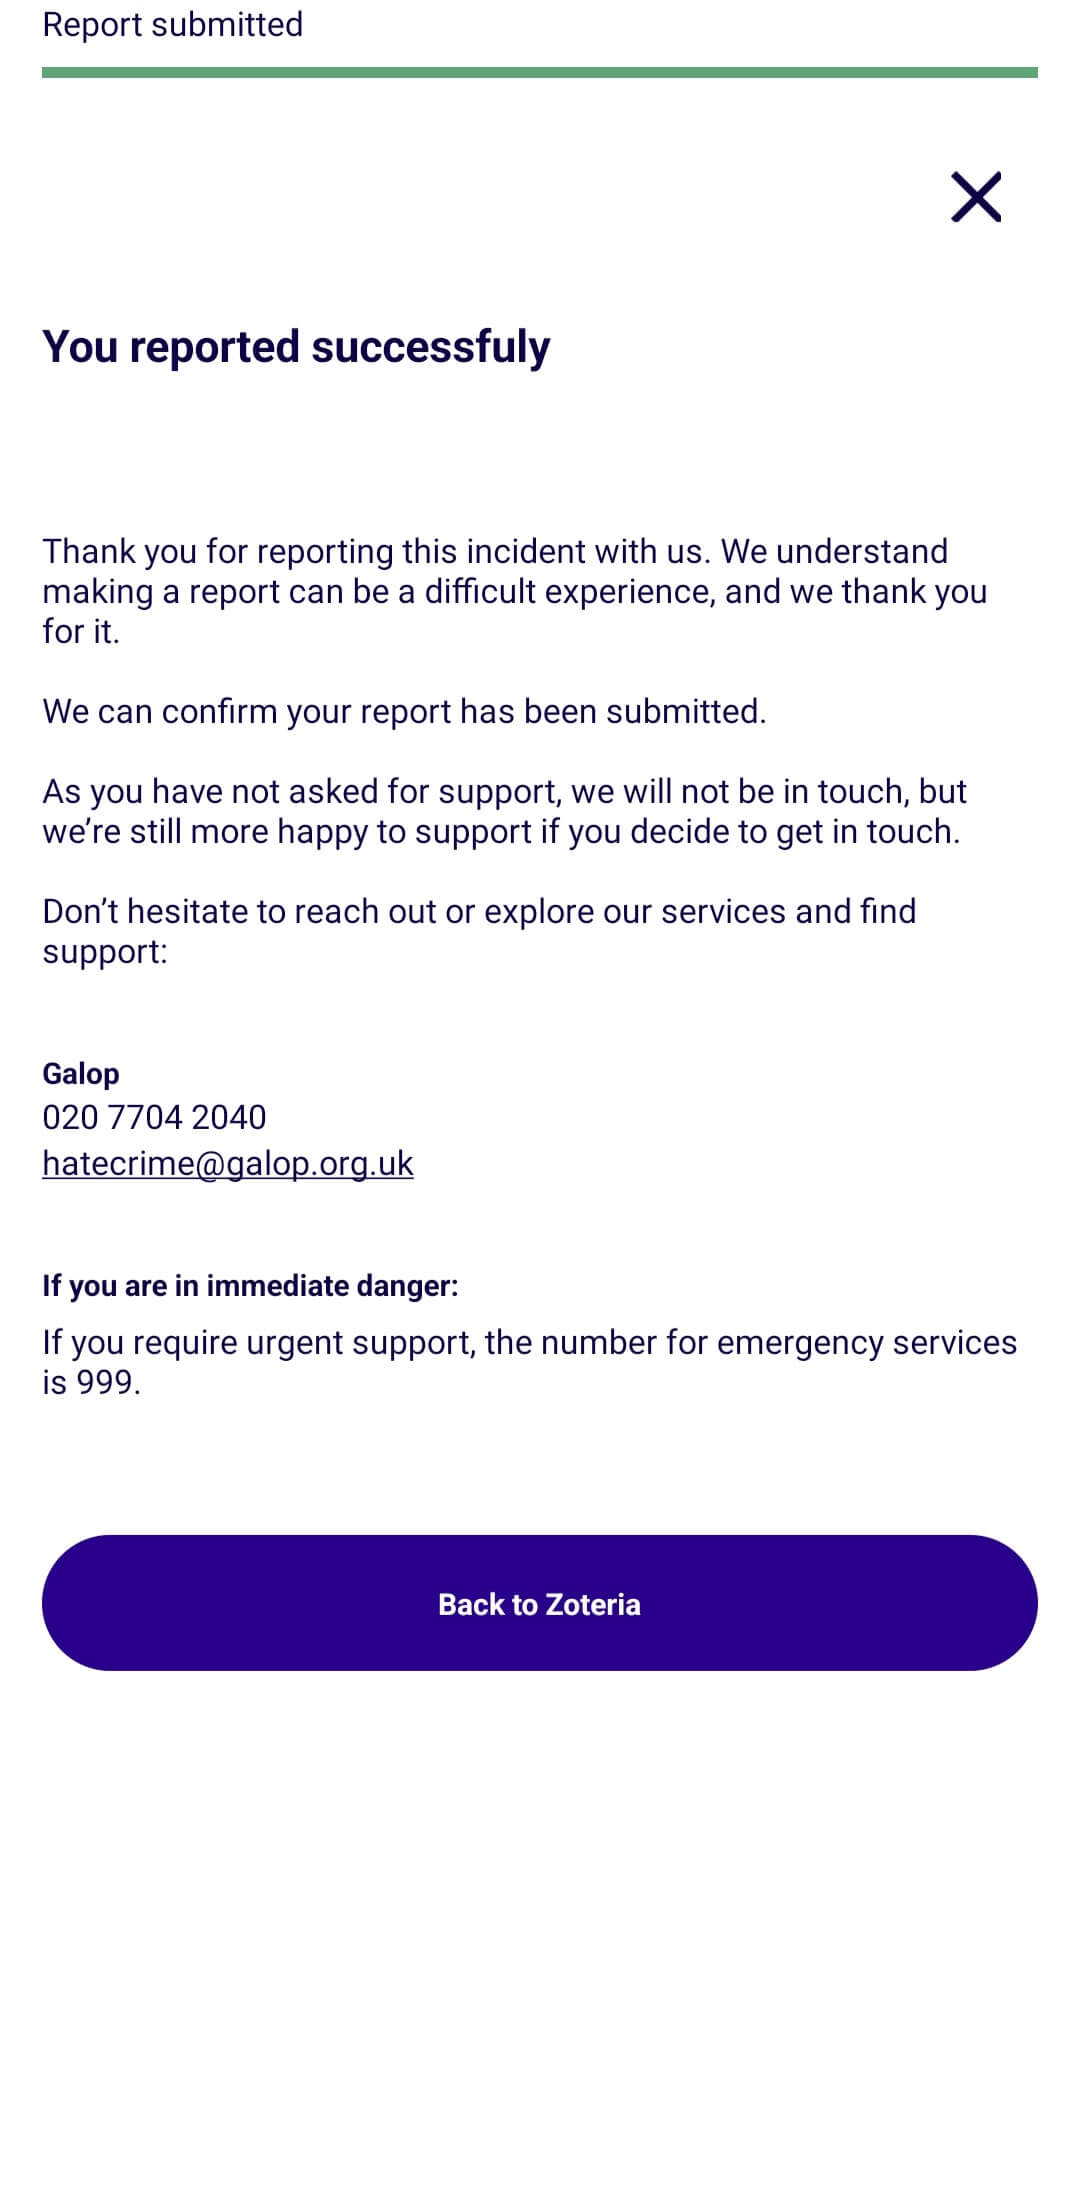 Final screen confirming submission l Reporting an incident in Zoteria App l Zoteria App l Launched by Galop, Stonewall and Vodafone Foundation l App Creator Marta Lima l LGBTQ+ Hate Crimes UK l LGBTQ Wellness